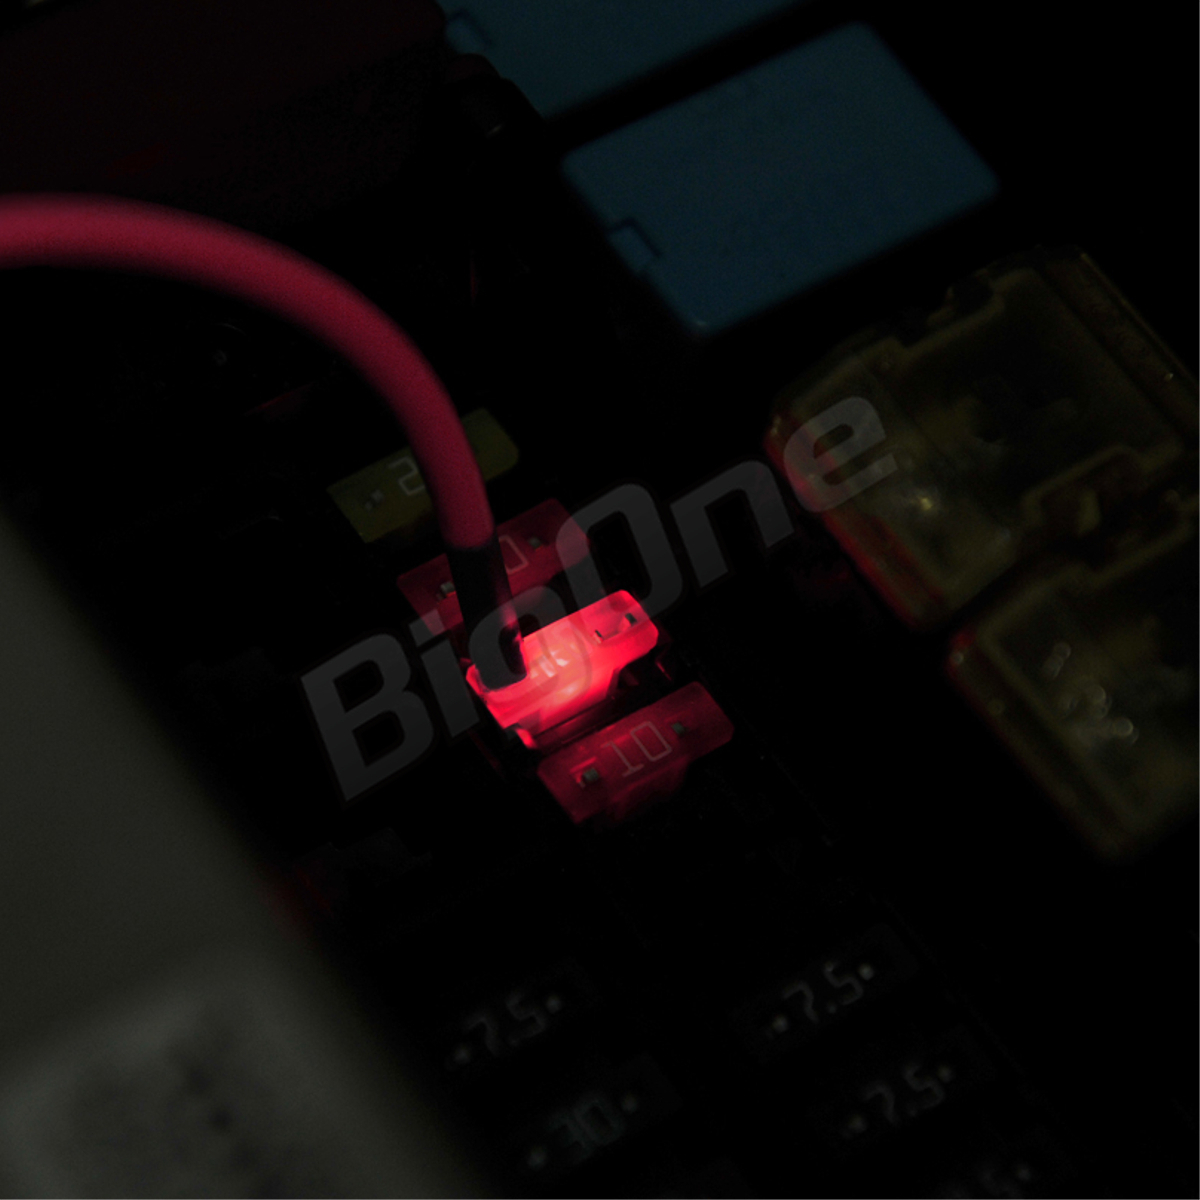 BigOne torn .. light ...... indicator built-in low . flat type fuse power supply 15A ASM LED chigar lighter ETC drive recorder. connection 